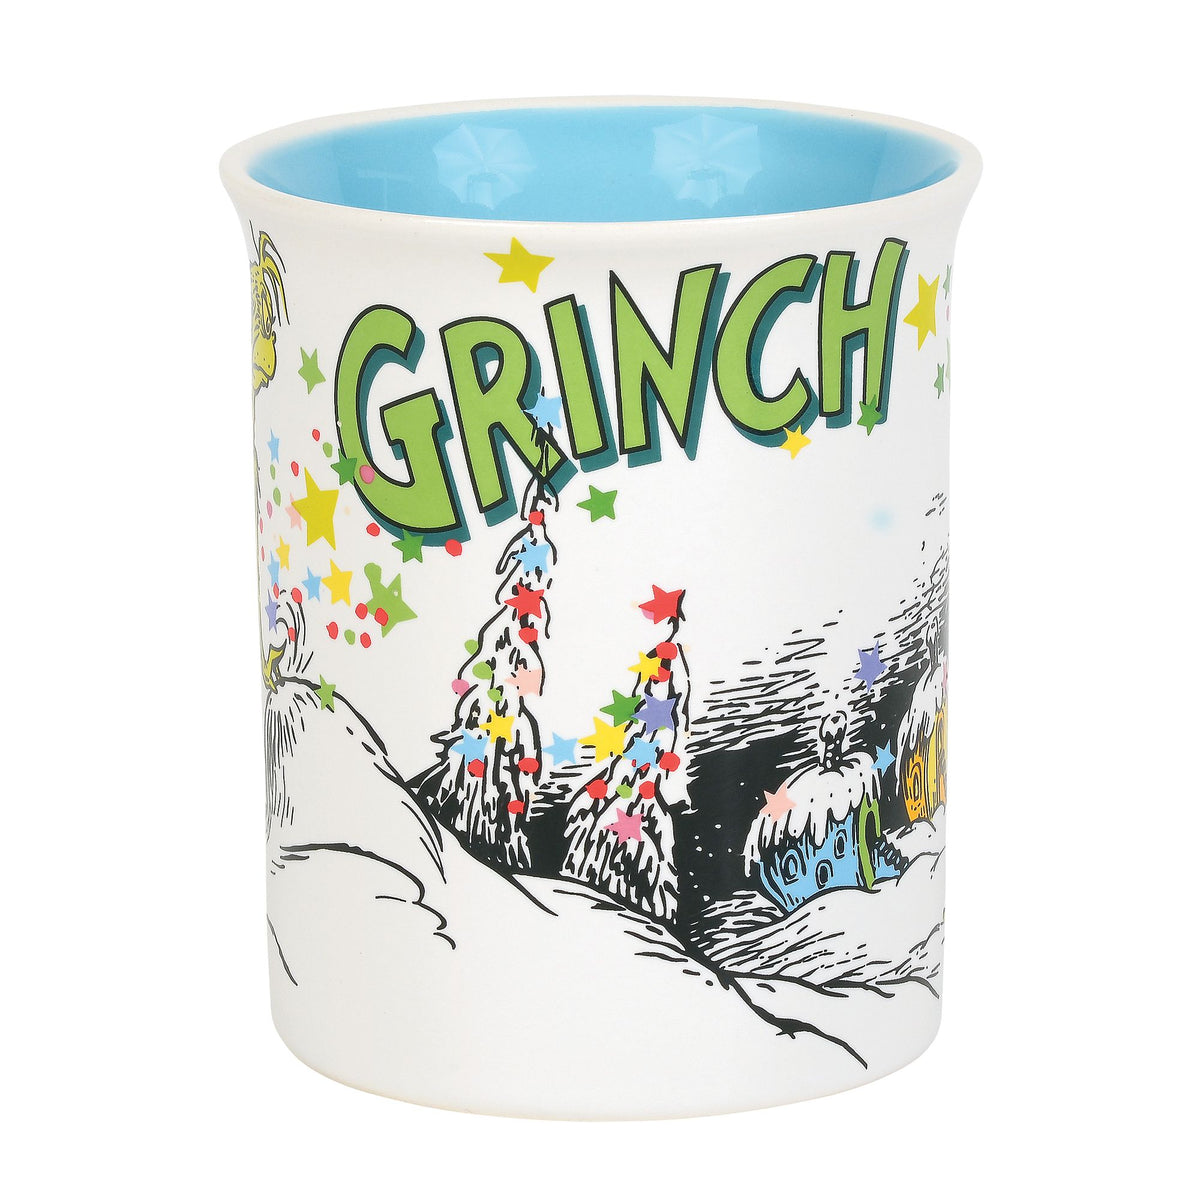 Department 56 Dr. Seuss The Grinch Santa Face Sculpted Coffee Mug, 1 Count  (Pack of 1), Multicolor